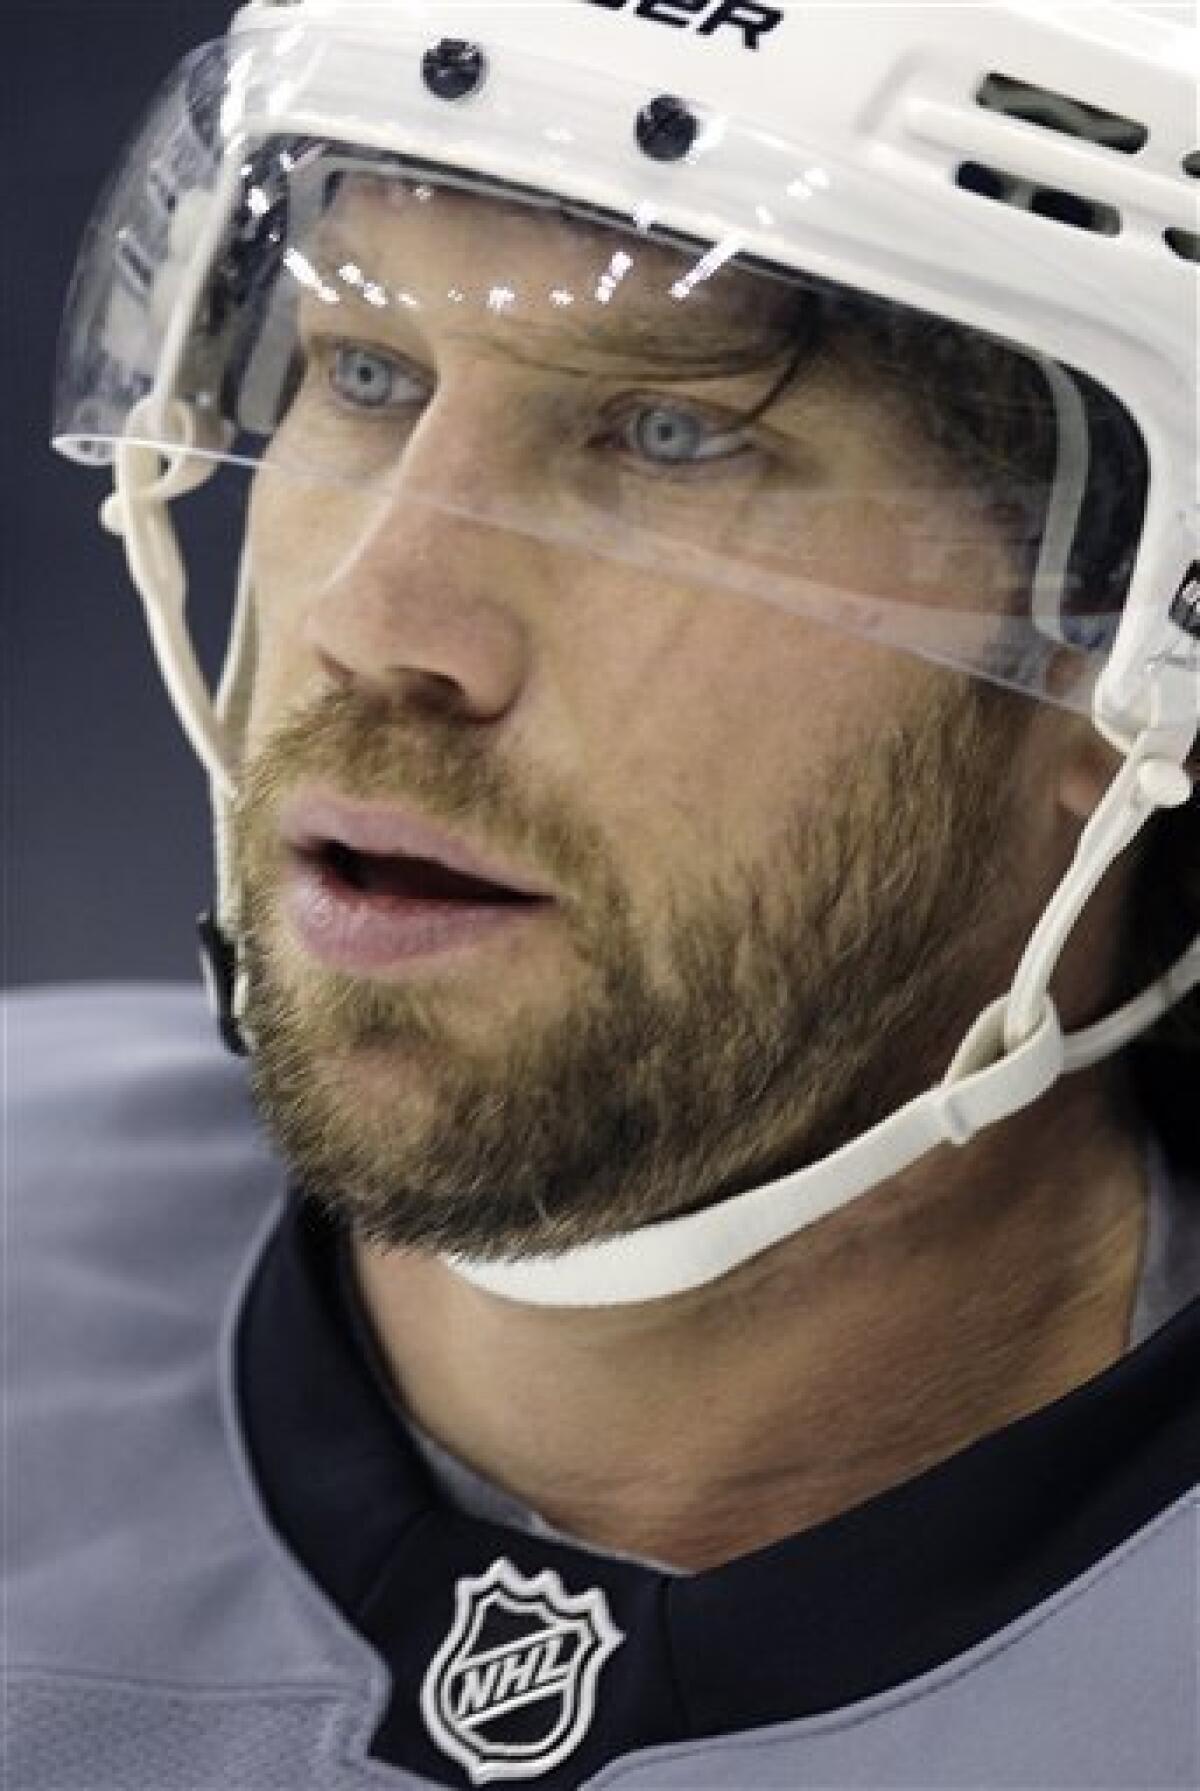 Peter Forsberg: A Look Back at a Storied NHL Career